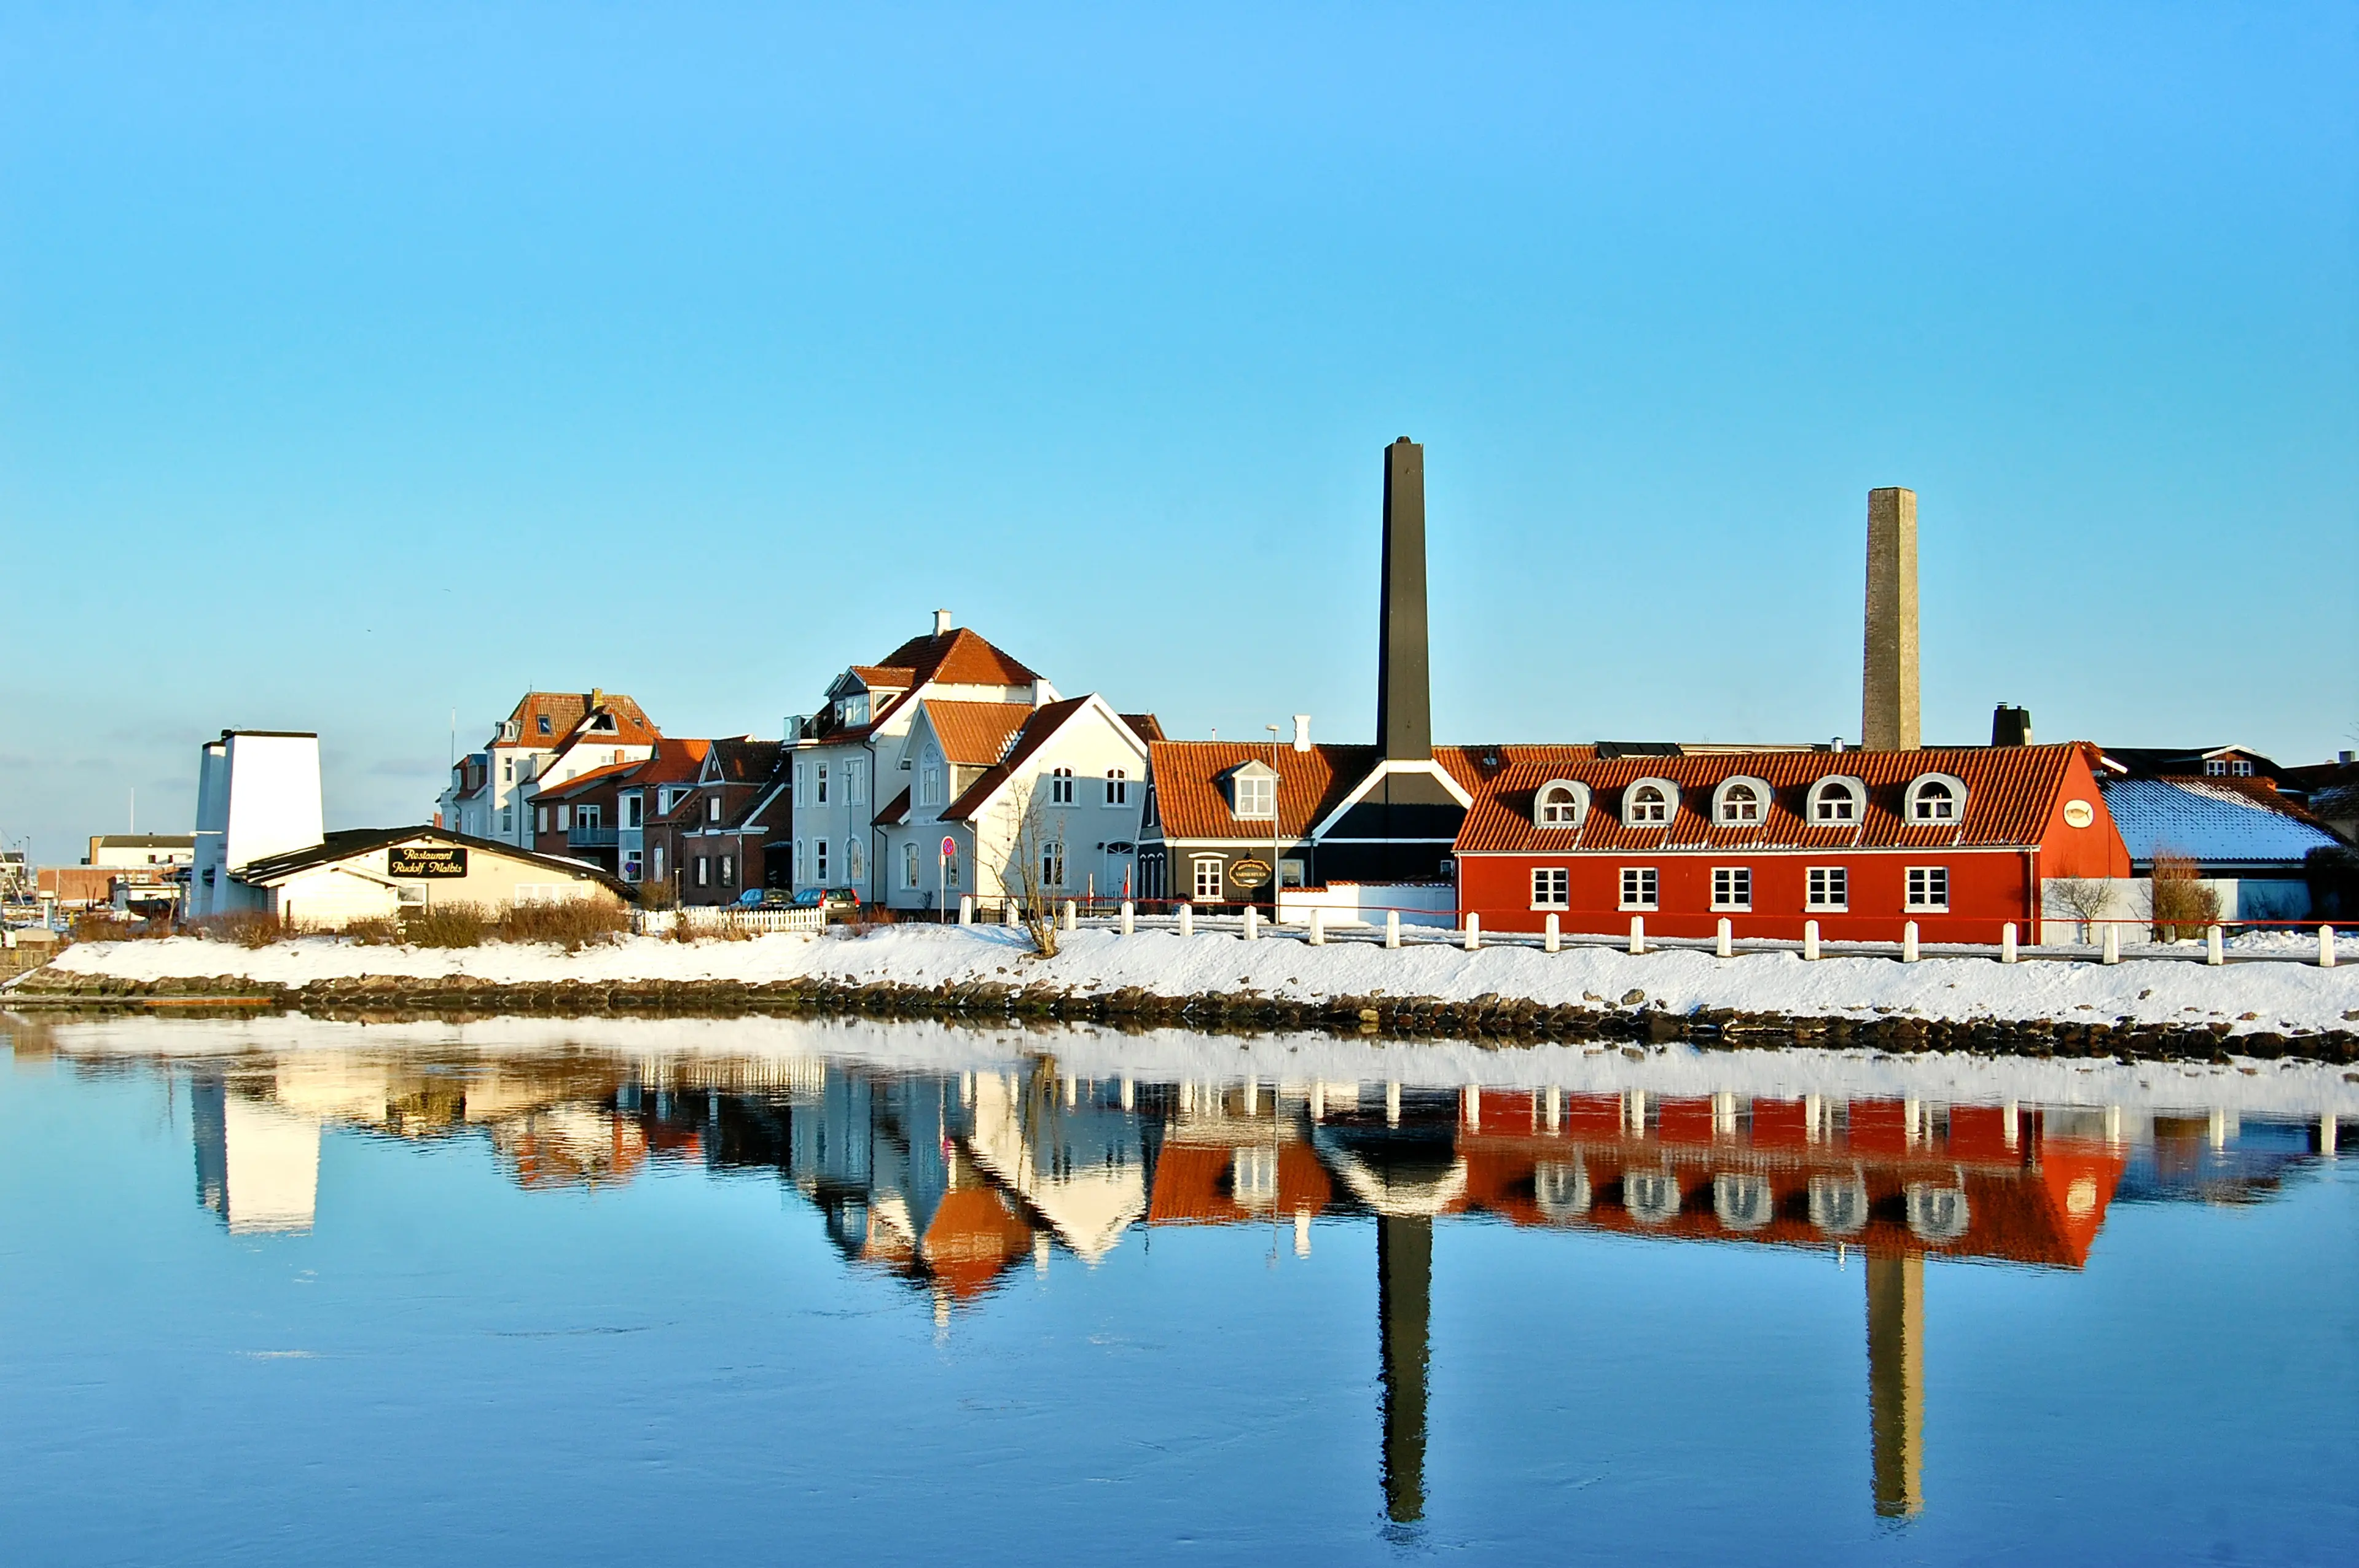 3-Day Local Outdoor Activity Guide for Odense, Denmark